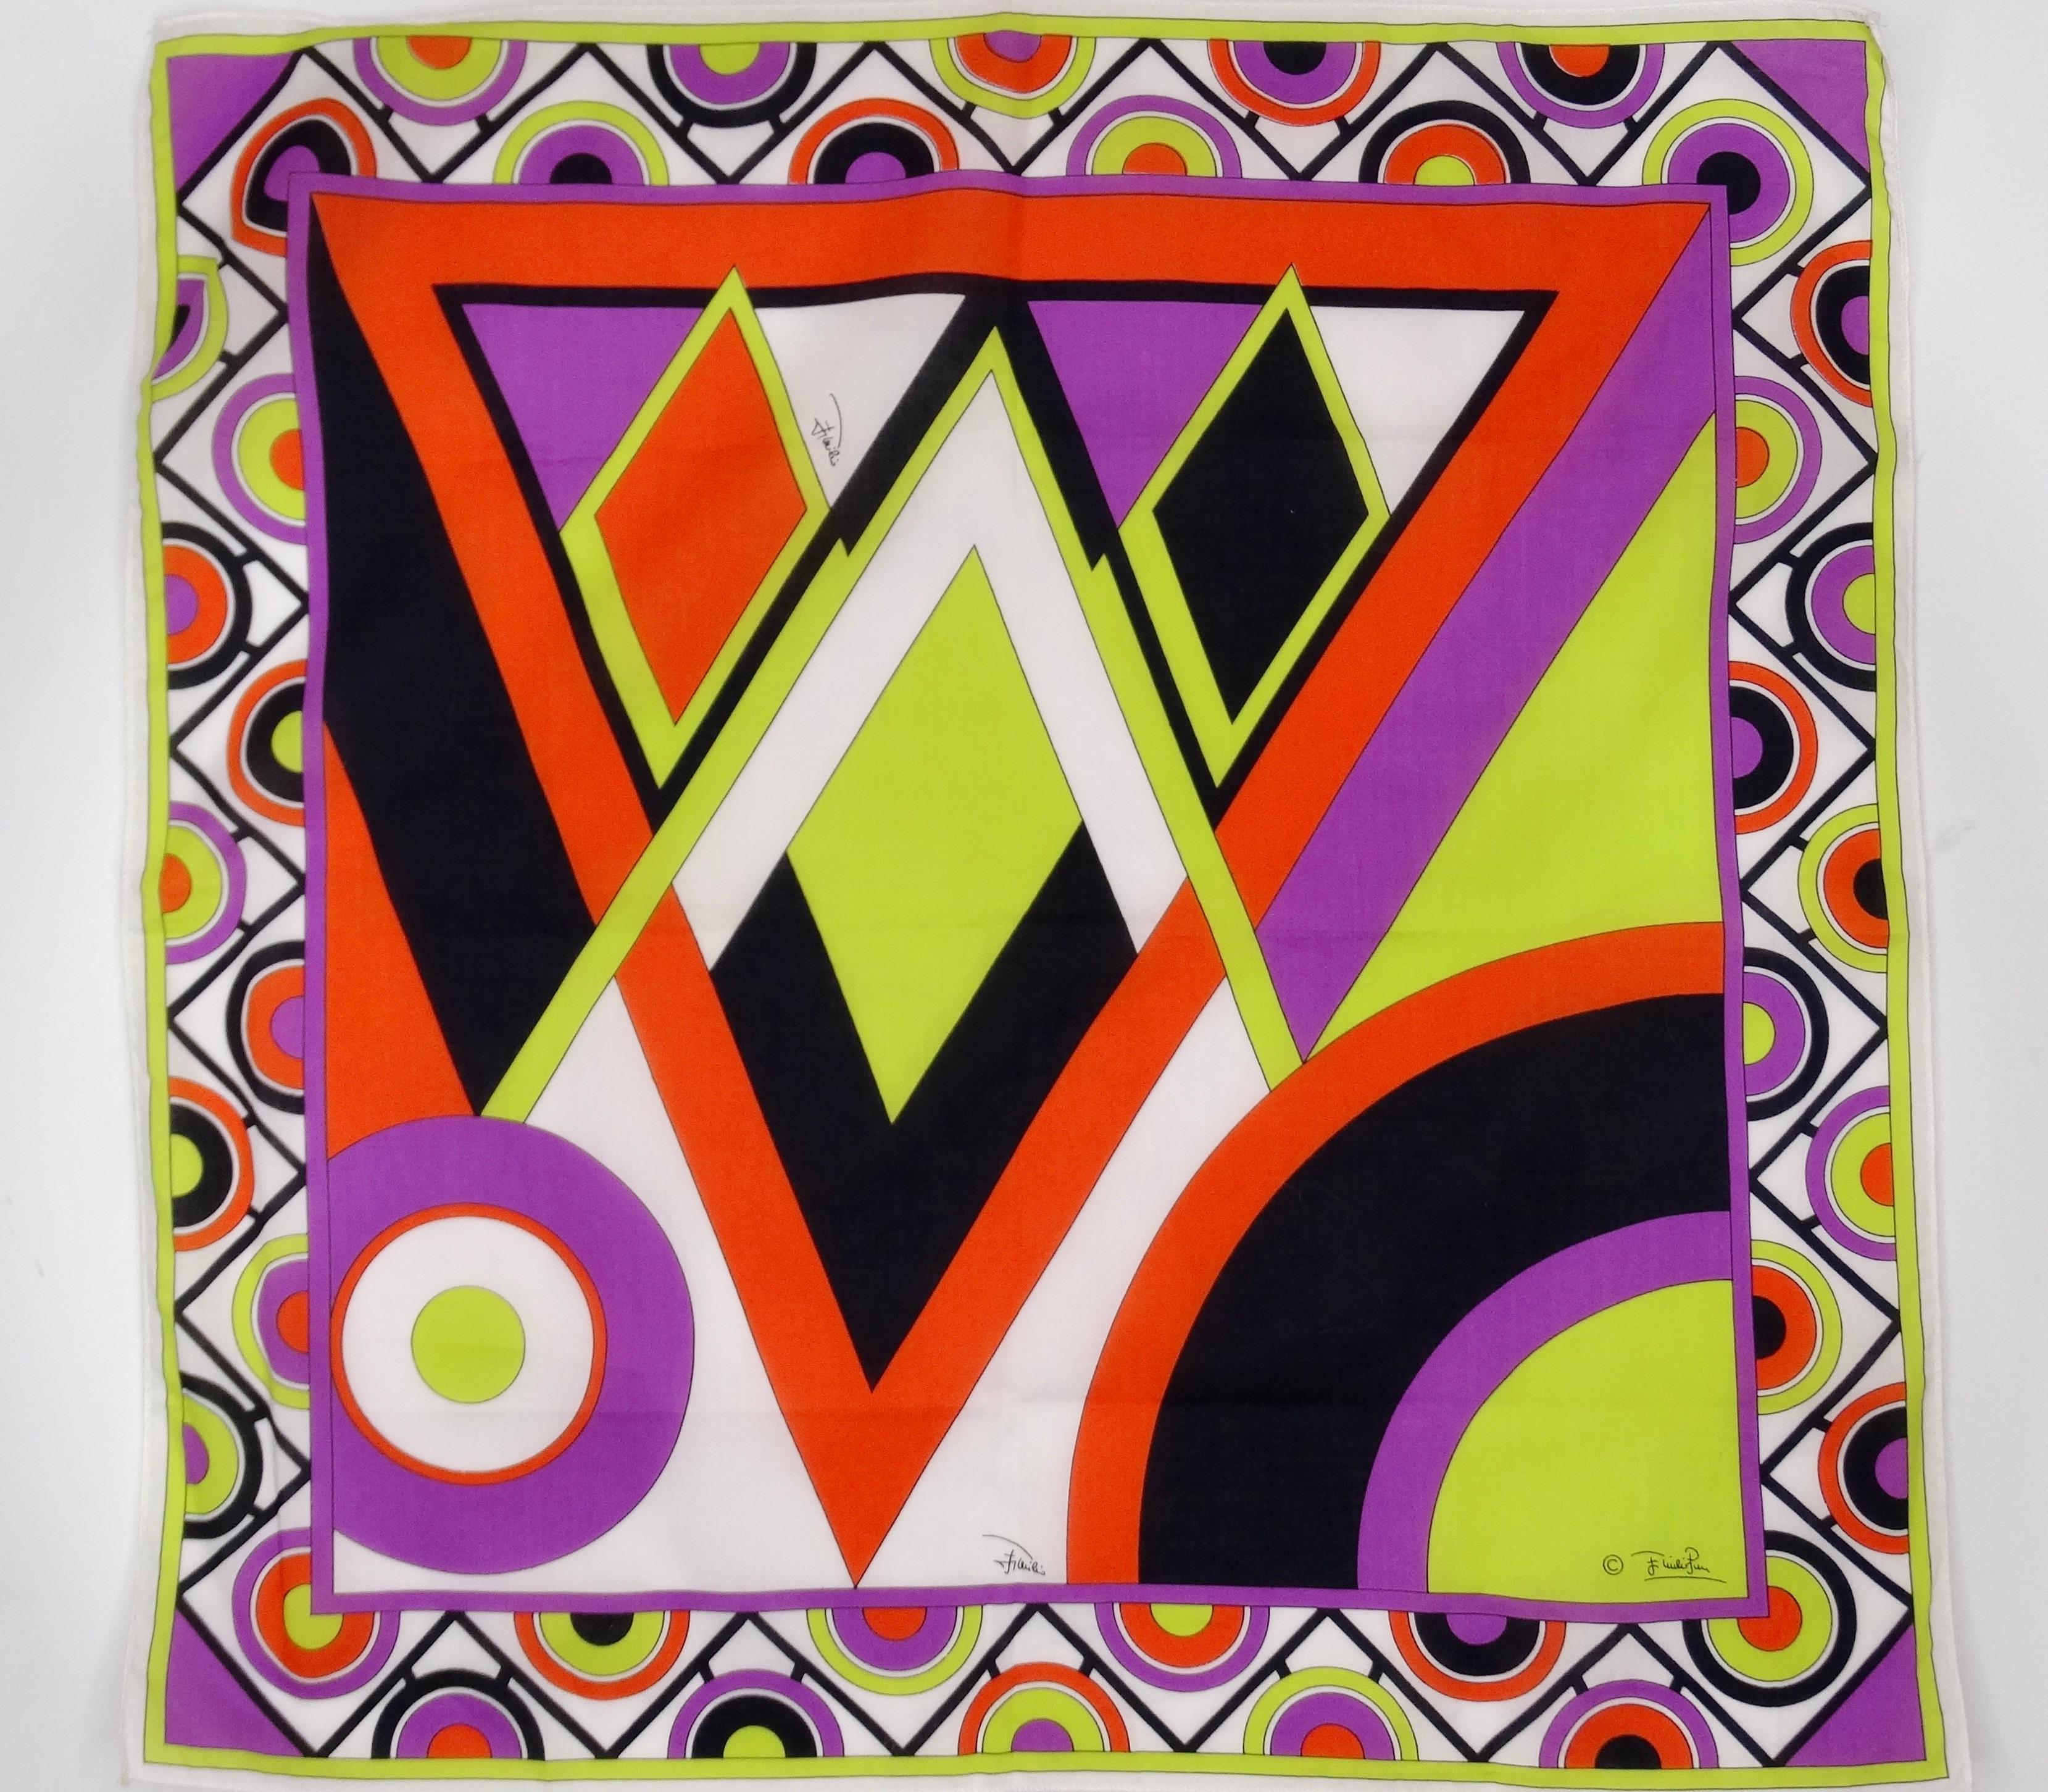 Add this Pucci to your collection! Circa 1960s, this adorable cotton scarf features one of Pucci's signature abstract designs with diamond shapes in colors of purple, orange, chartreuse and black. Geometric trim. Emilio Pucci written throughout,